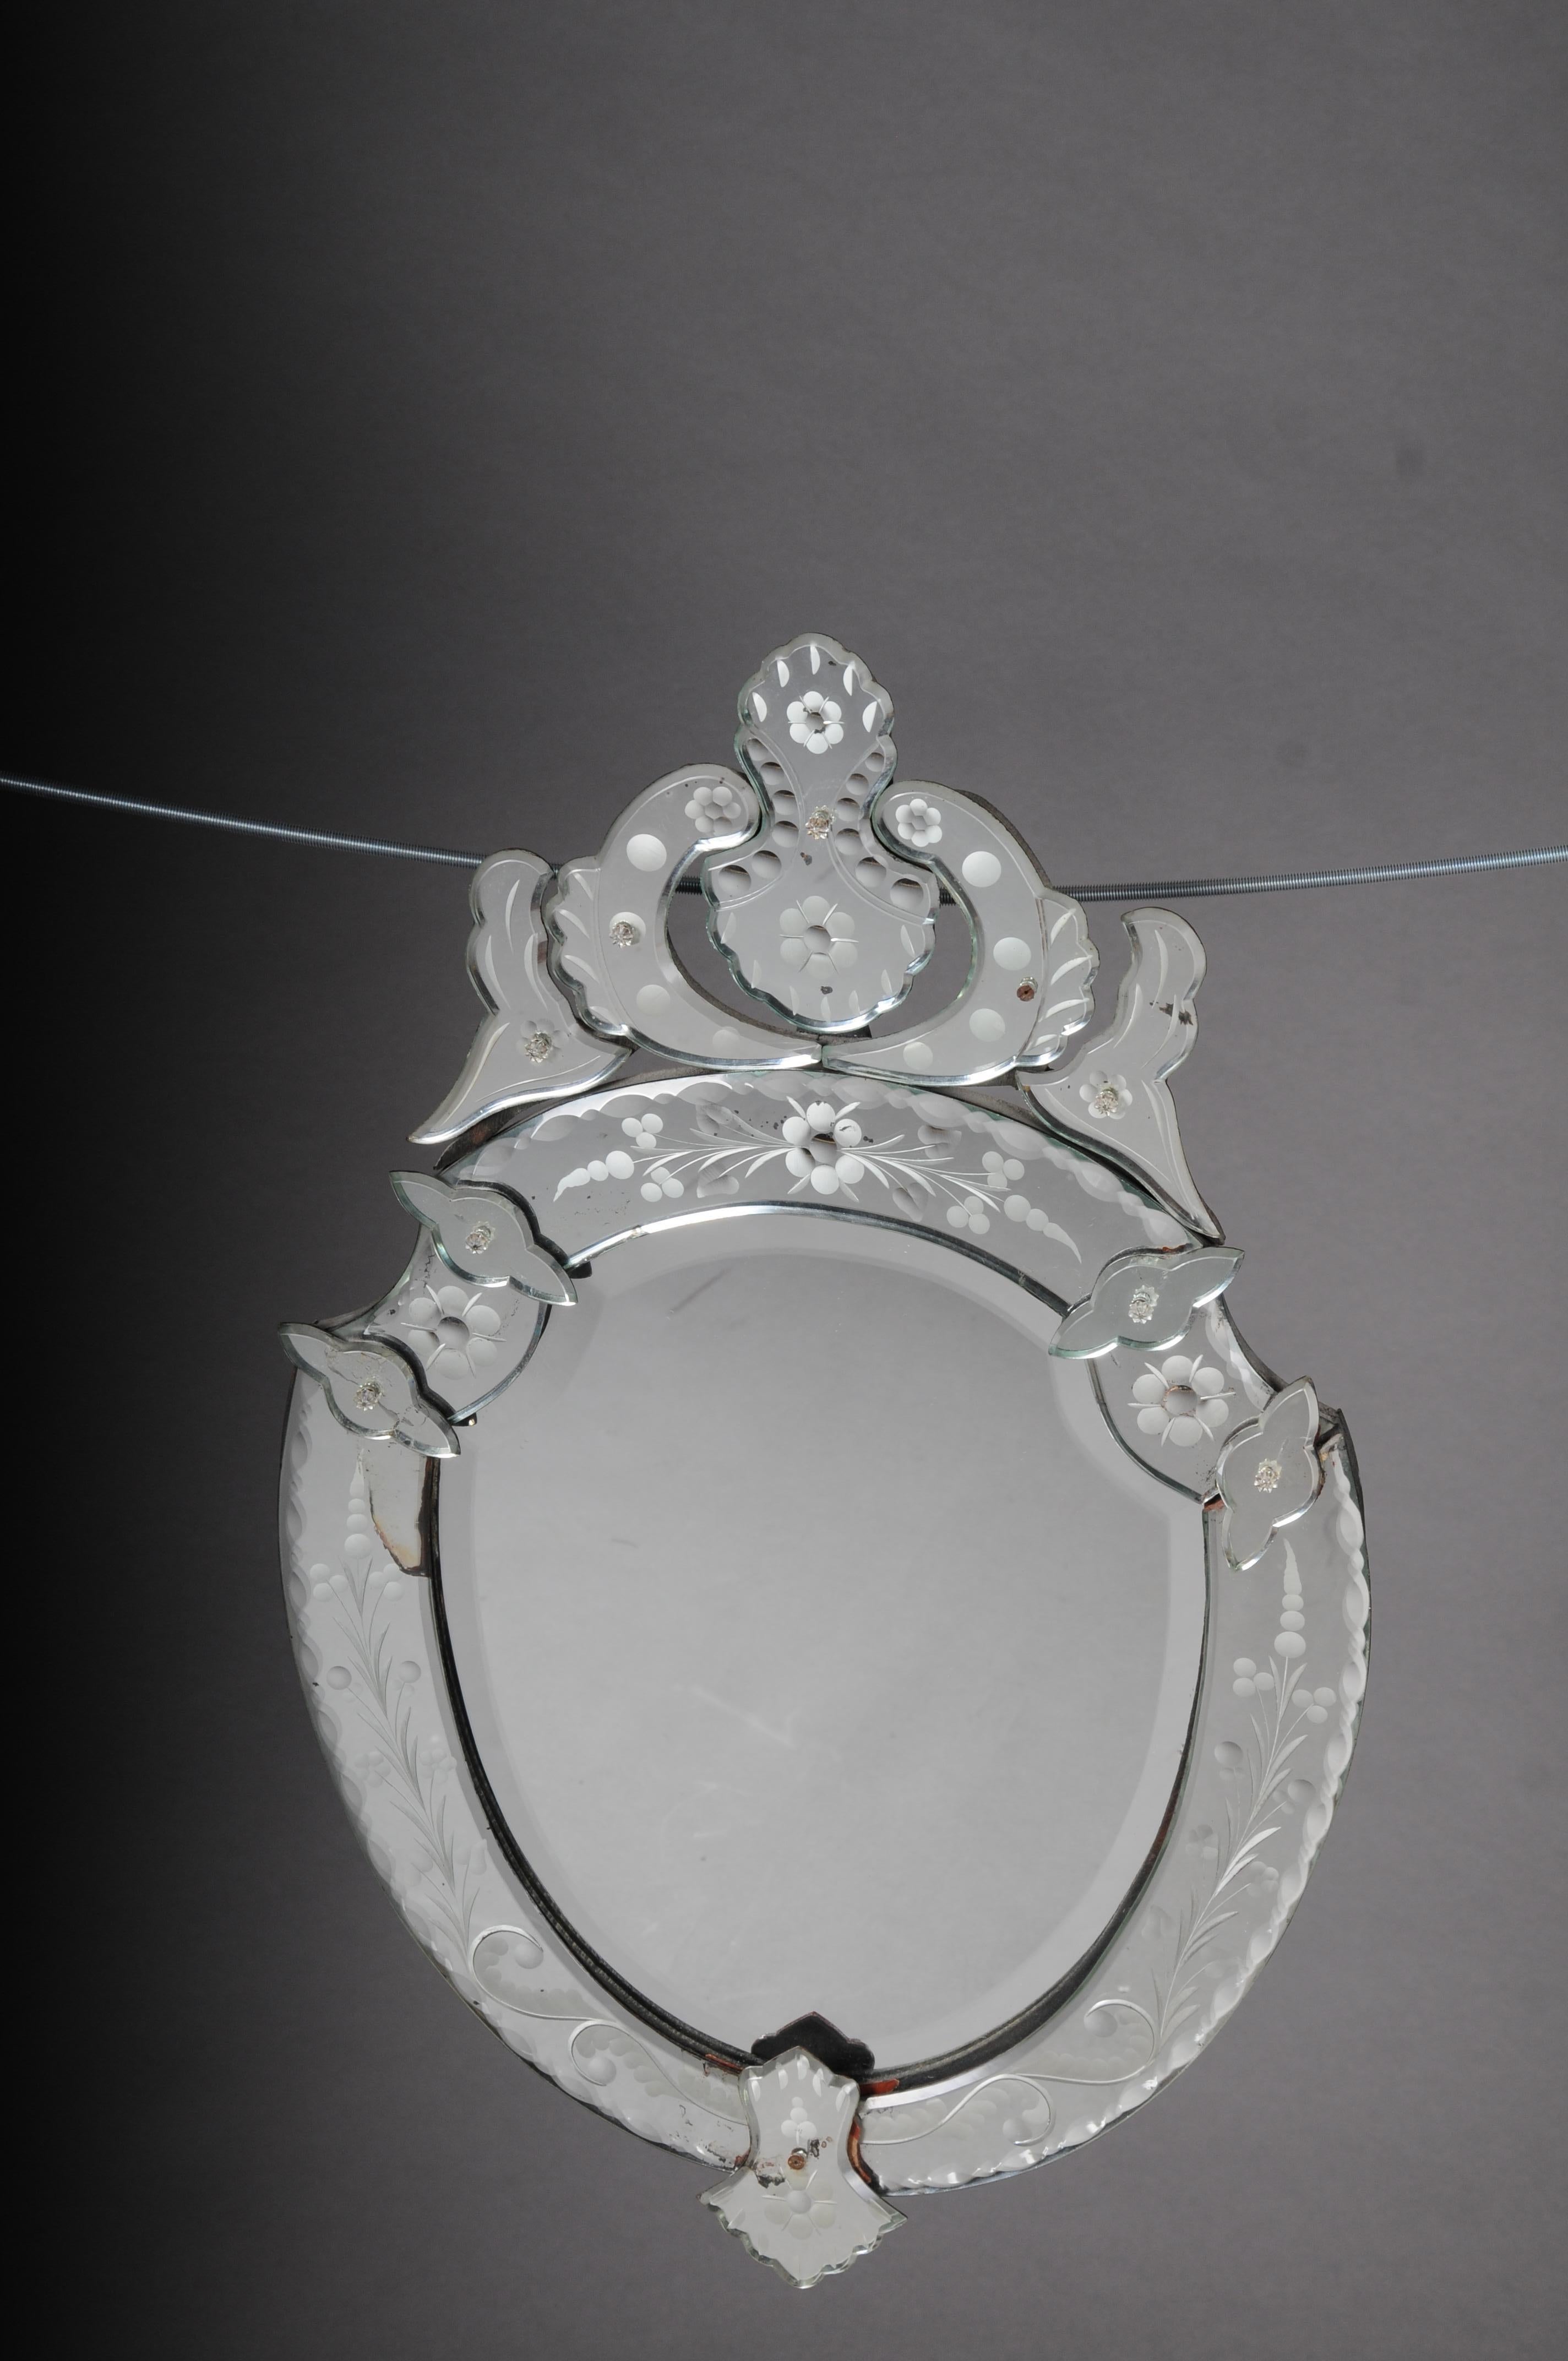 Polished Venetian pompous wall mirror, 20th century

Finely ground, rounded wall mirror, body with a high crown. Circumferentially with floral border. Very impressive and finely polished. Back panel attached with wooden frame.

Please refer to the